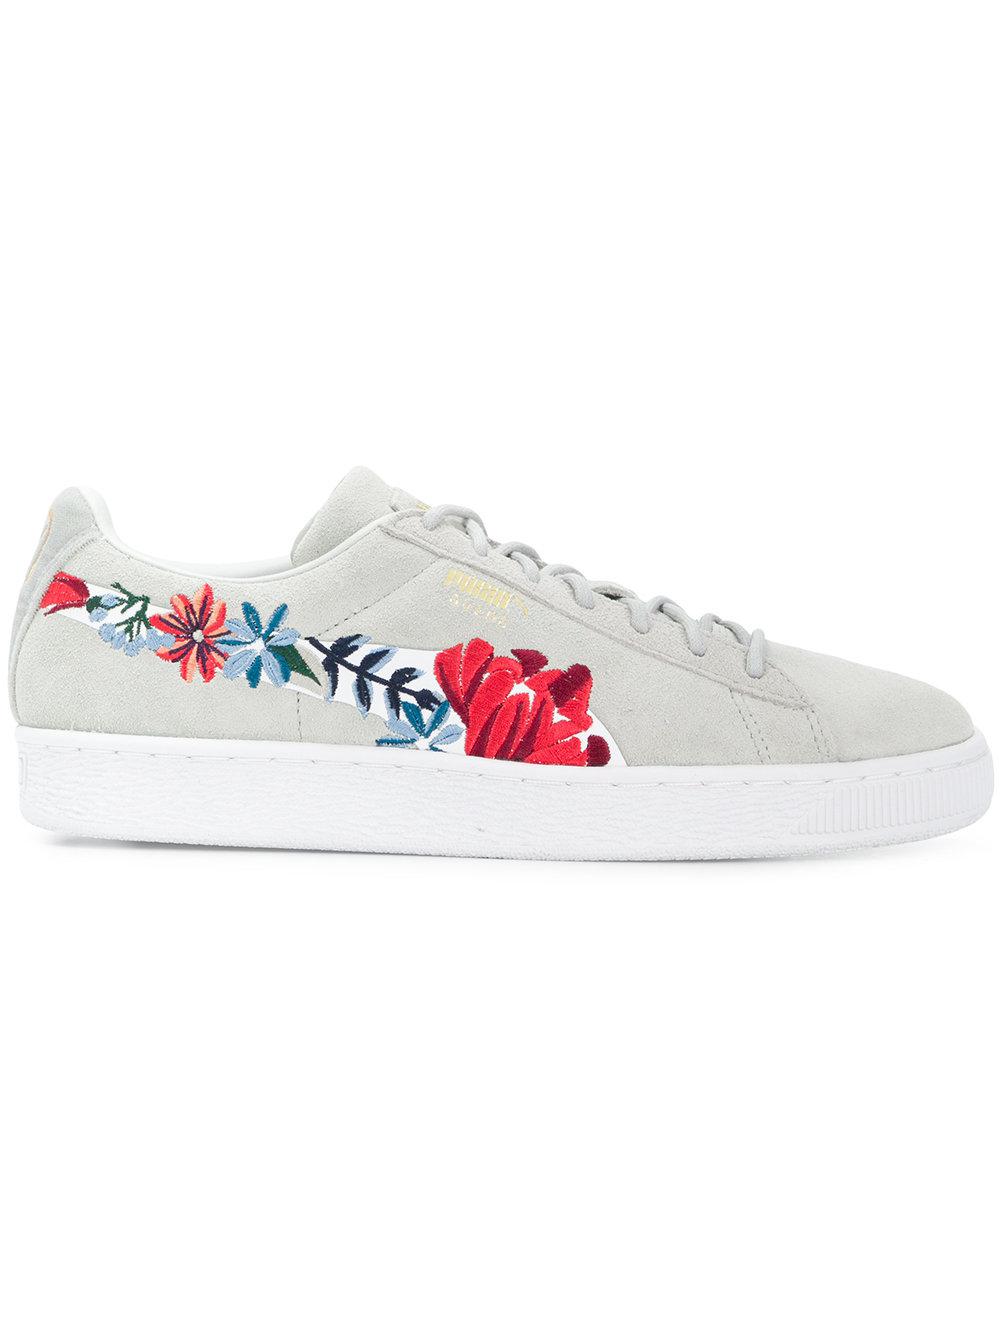 PUMA Suede Hyper Floral Embroidered Sneakers in Grey (Gray) | Lyst